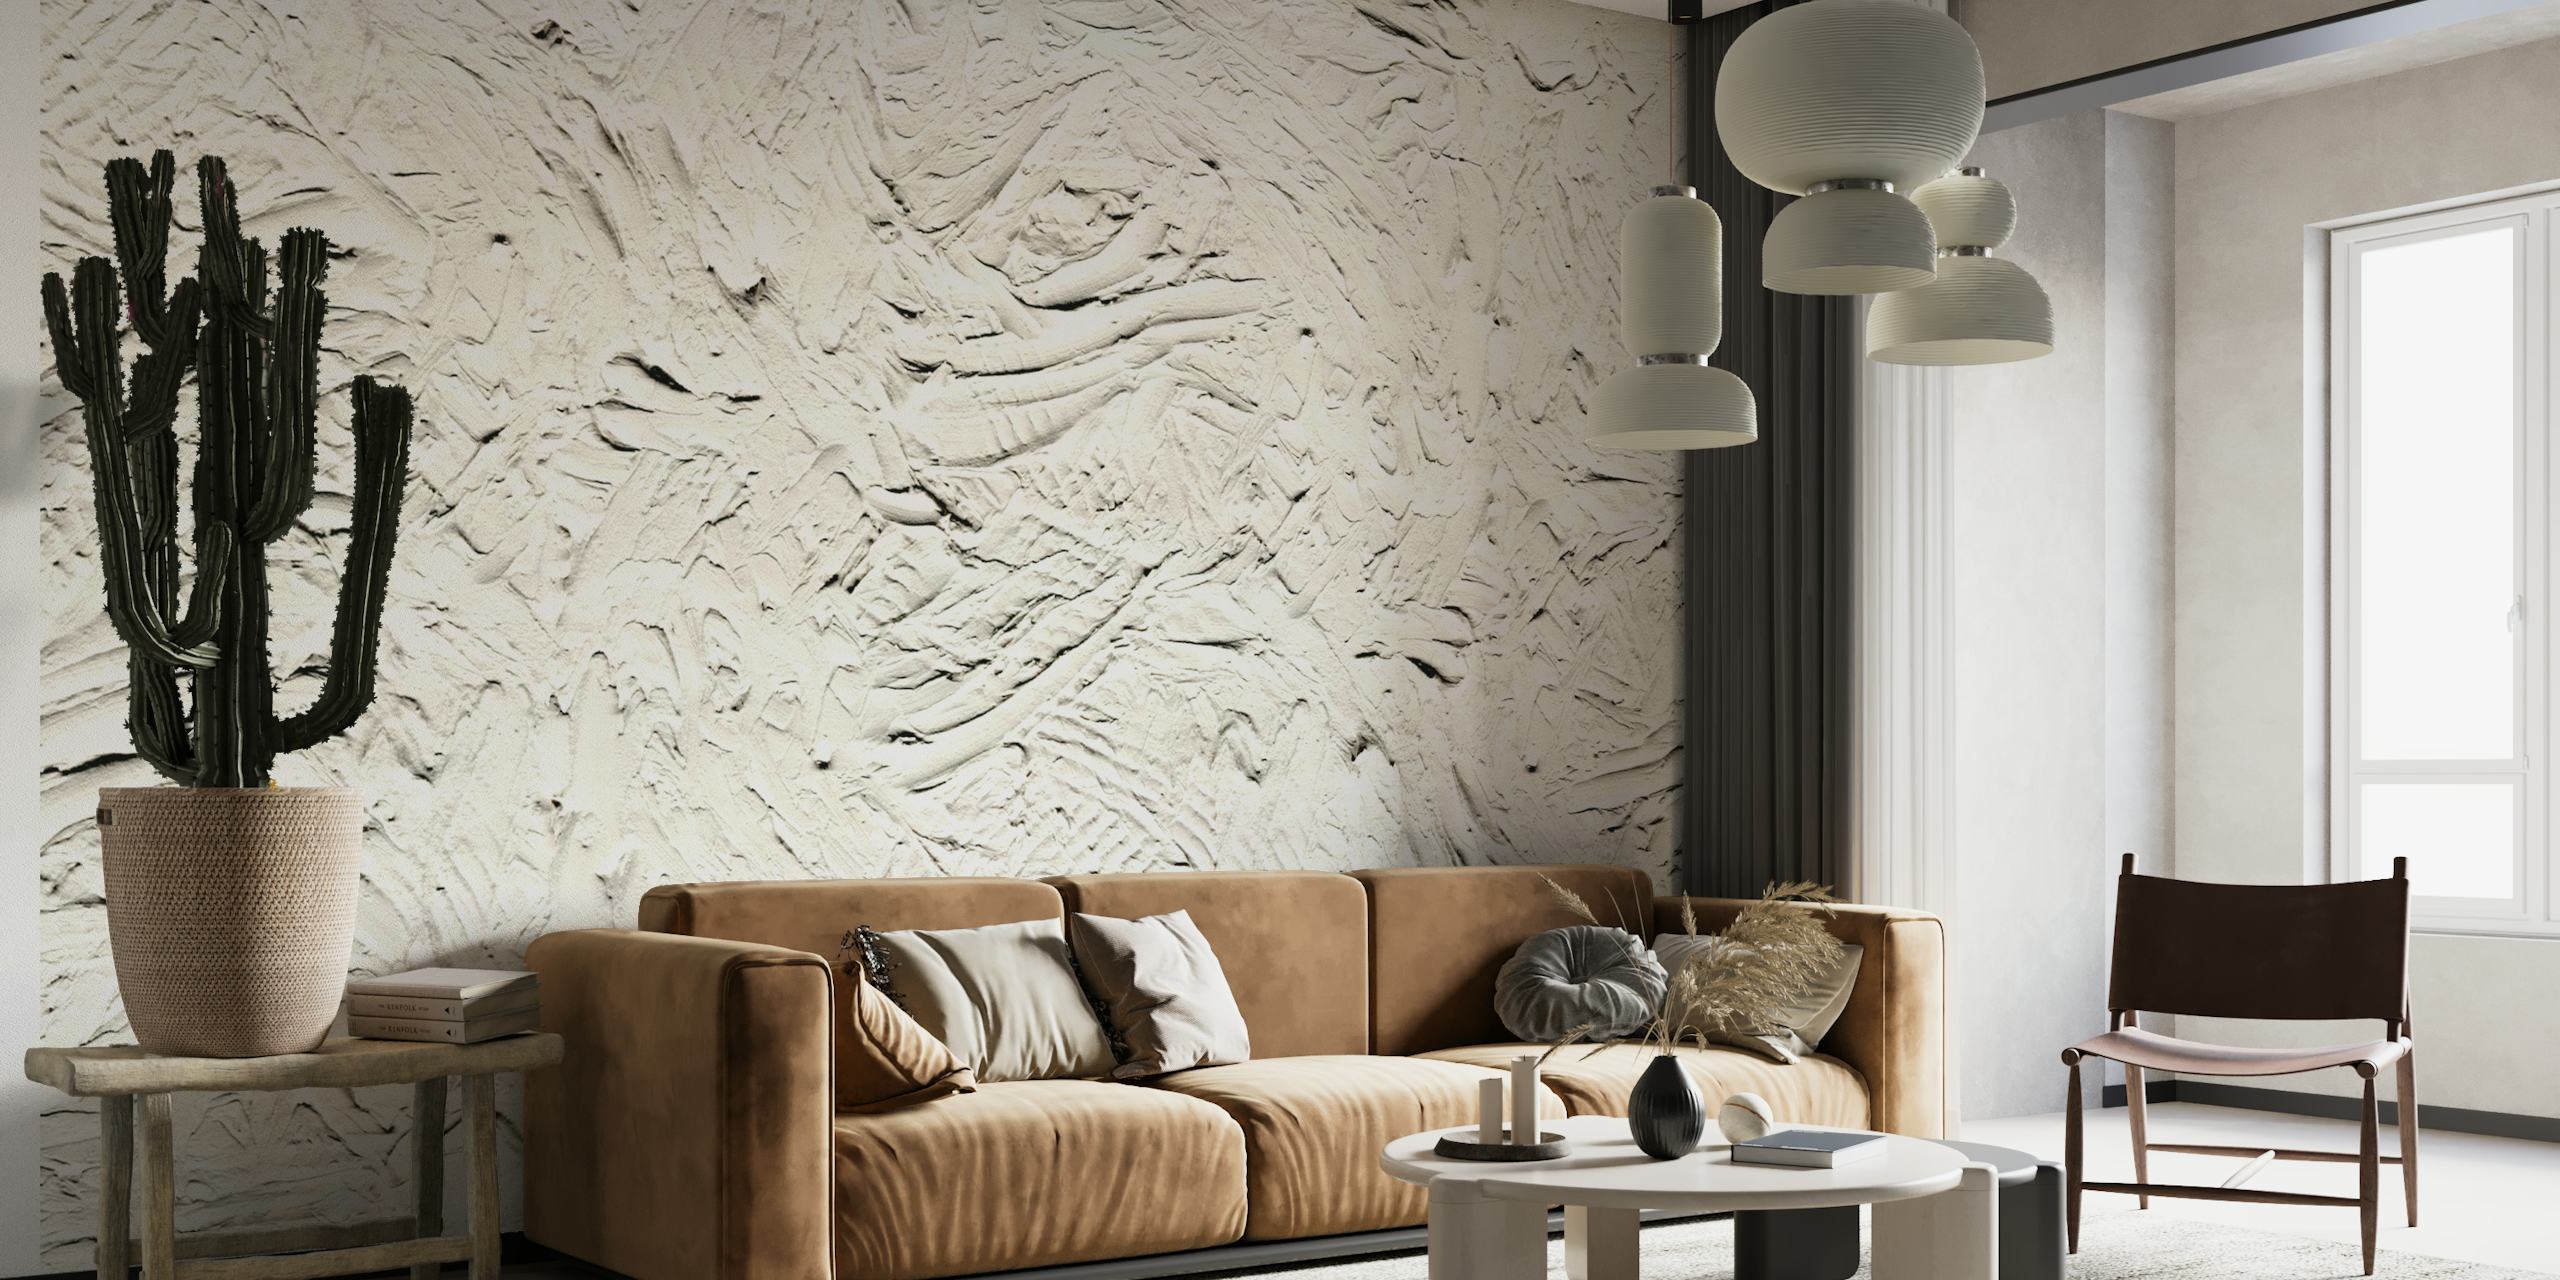 Textured slab pattern wall mural from Happywall named Slabby in neutral tones